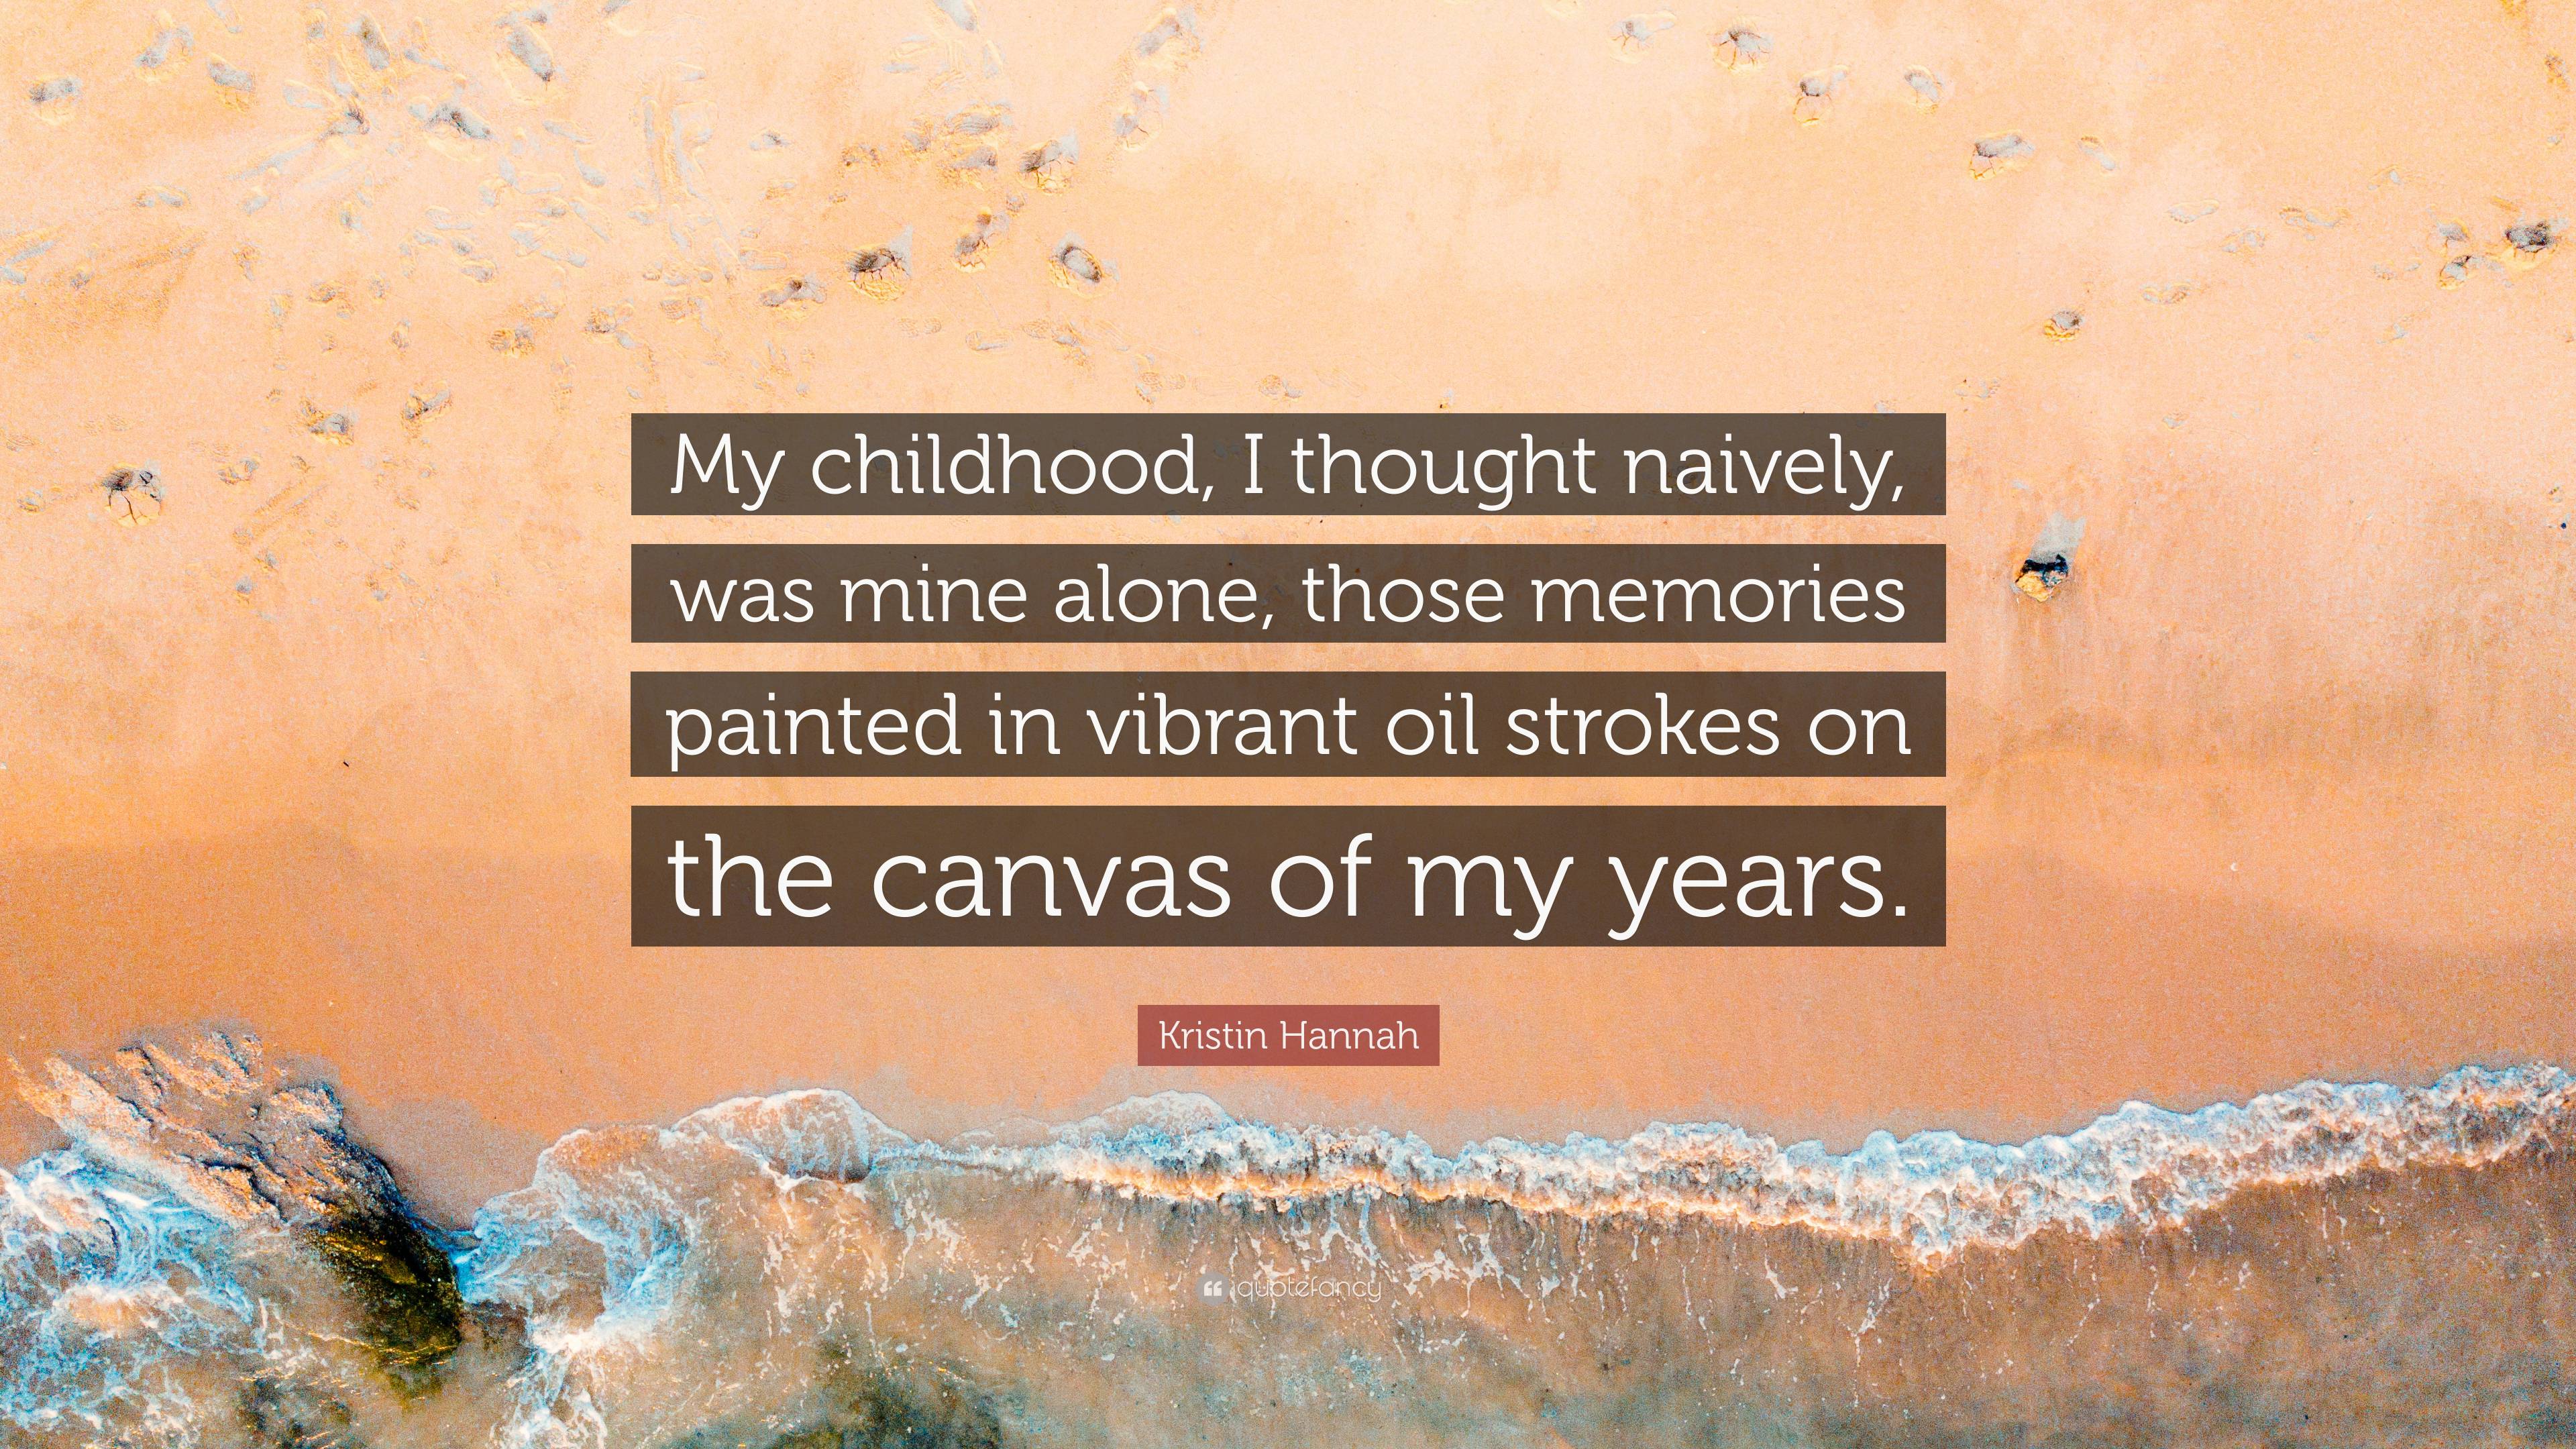 Kristin Hannah Quote: “My childhood, I thought naively, was mine alone,  those memories painted in vibrant oil strokes on the canvas of my years”